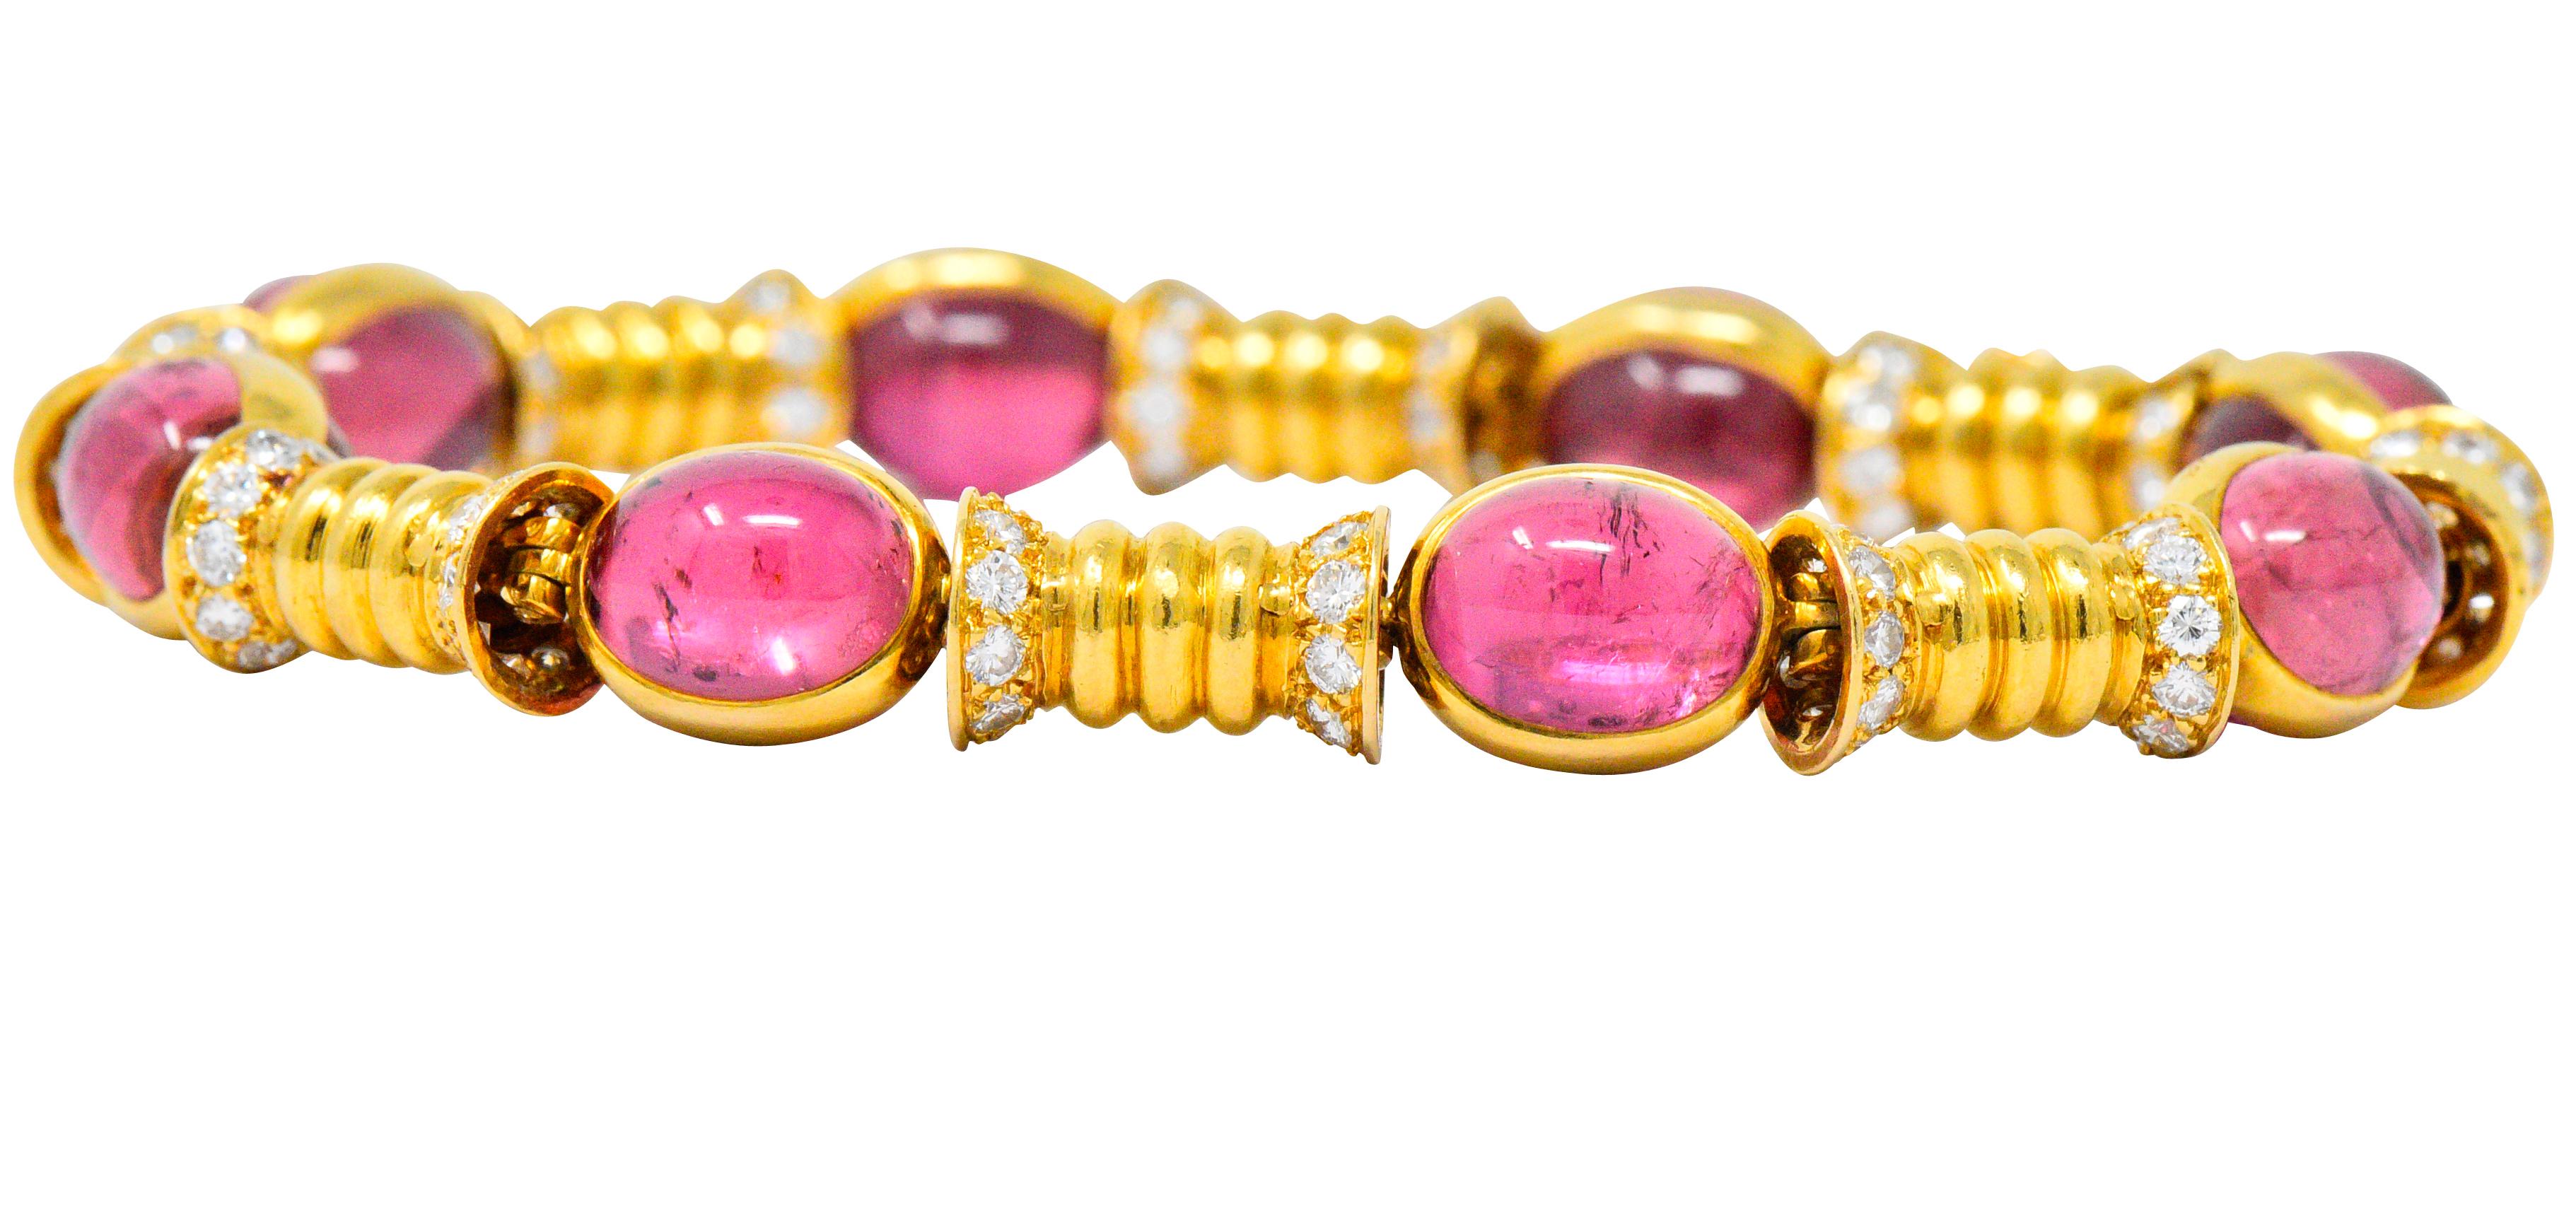 Featuring 16 oval cabochon pink tourmalines, set bottom to bottom and wrapped together with 18k gold, bright bubblegum pink and very well matched

With fluted gold spacer links accented with round brilliant cut diamonds

Total diamond weight